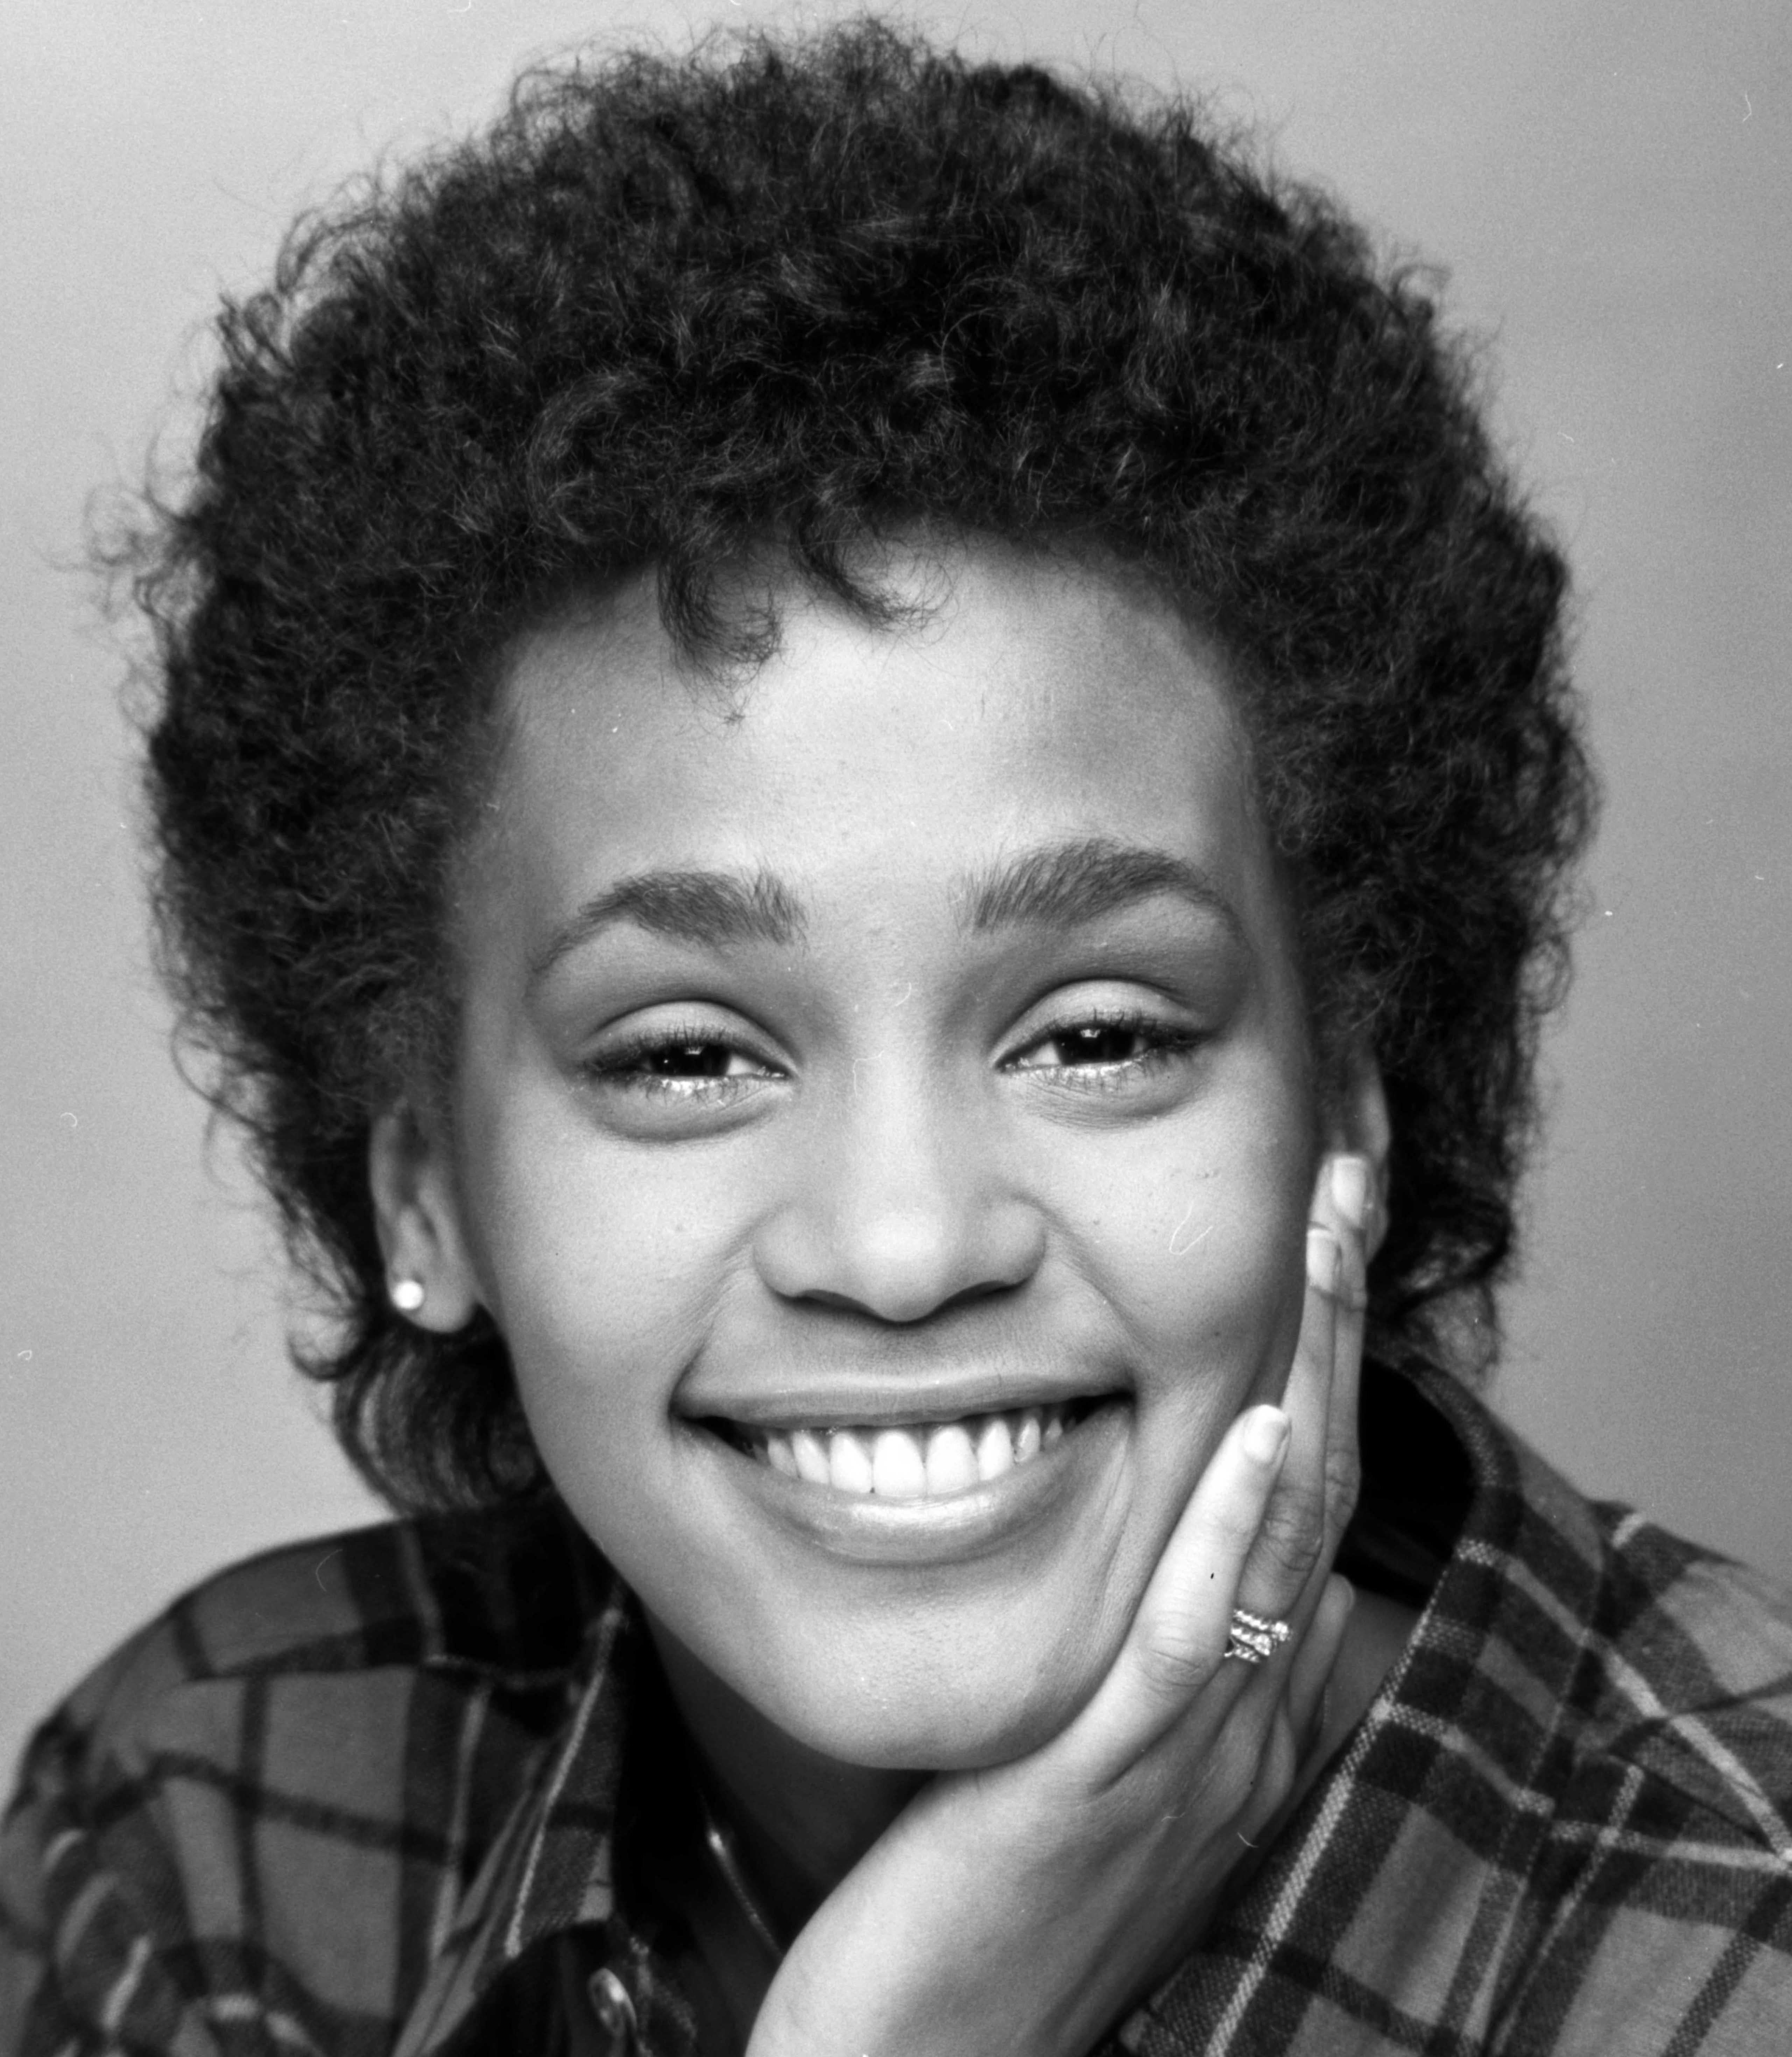 Singer Whitney Houston when she was a senior in high school, first photo session - Photograph by Jack Mitchell